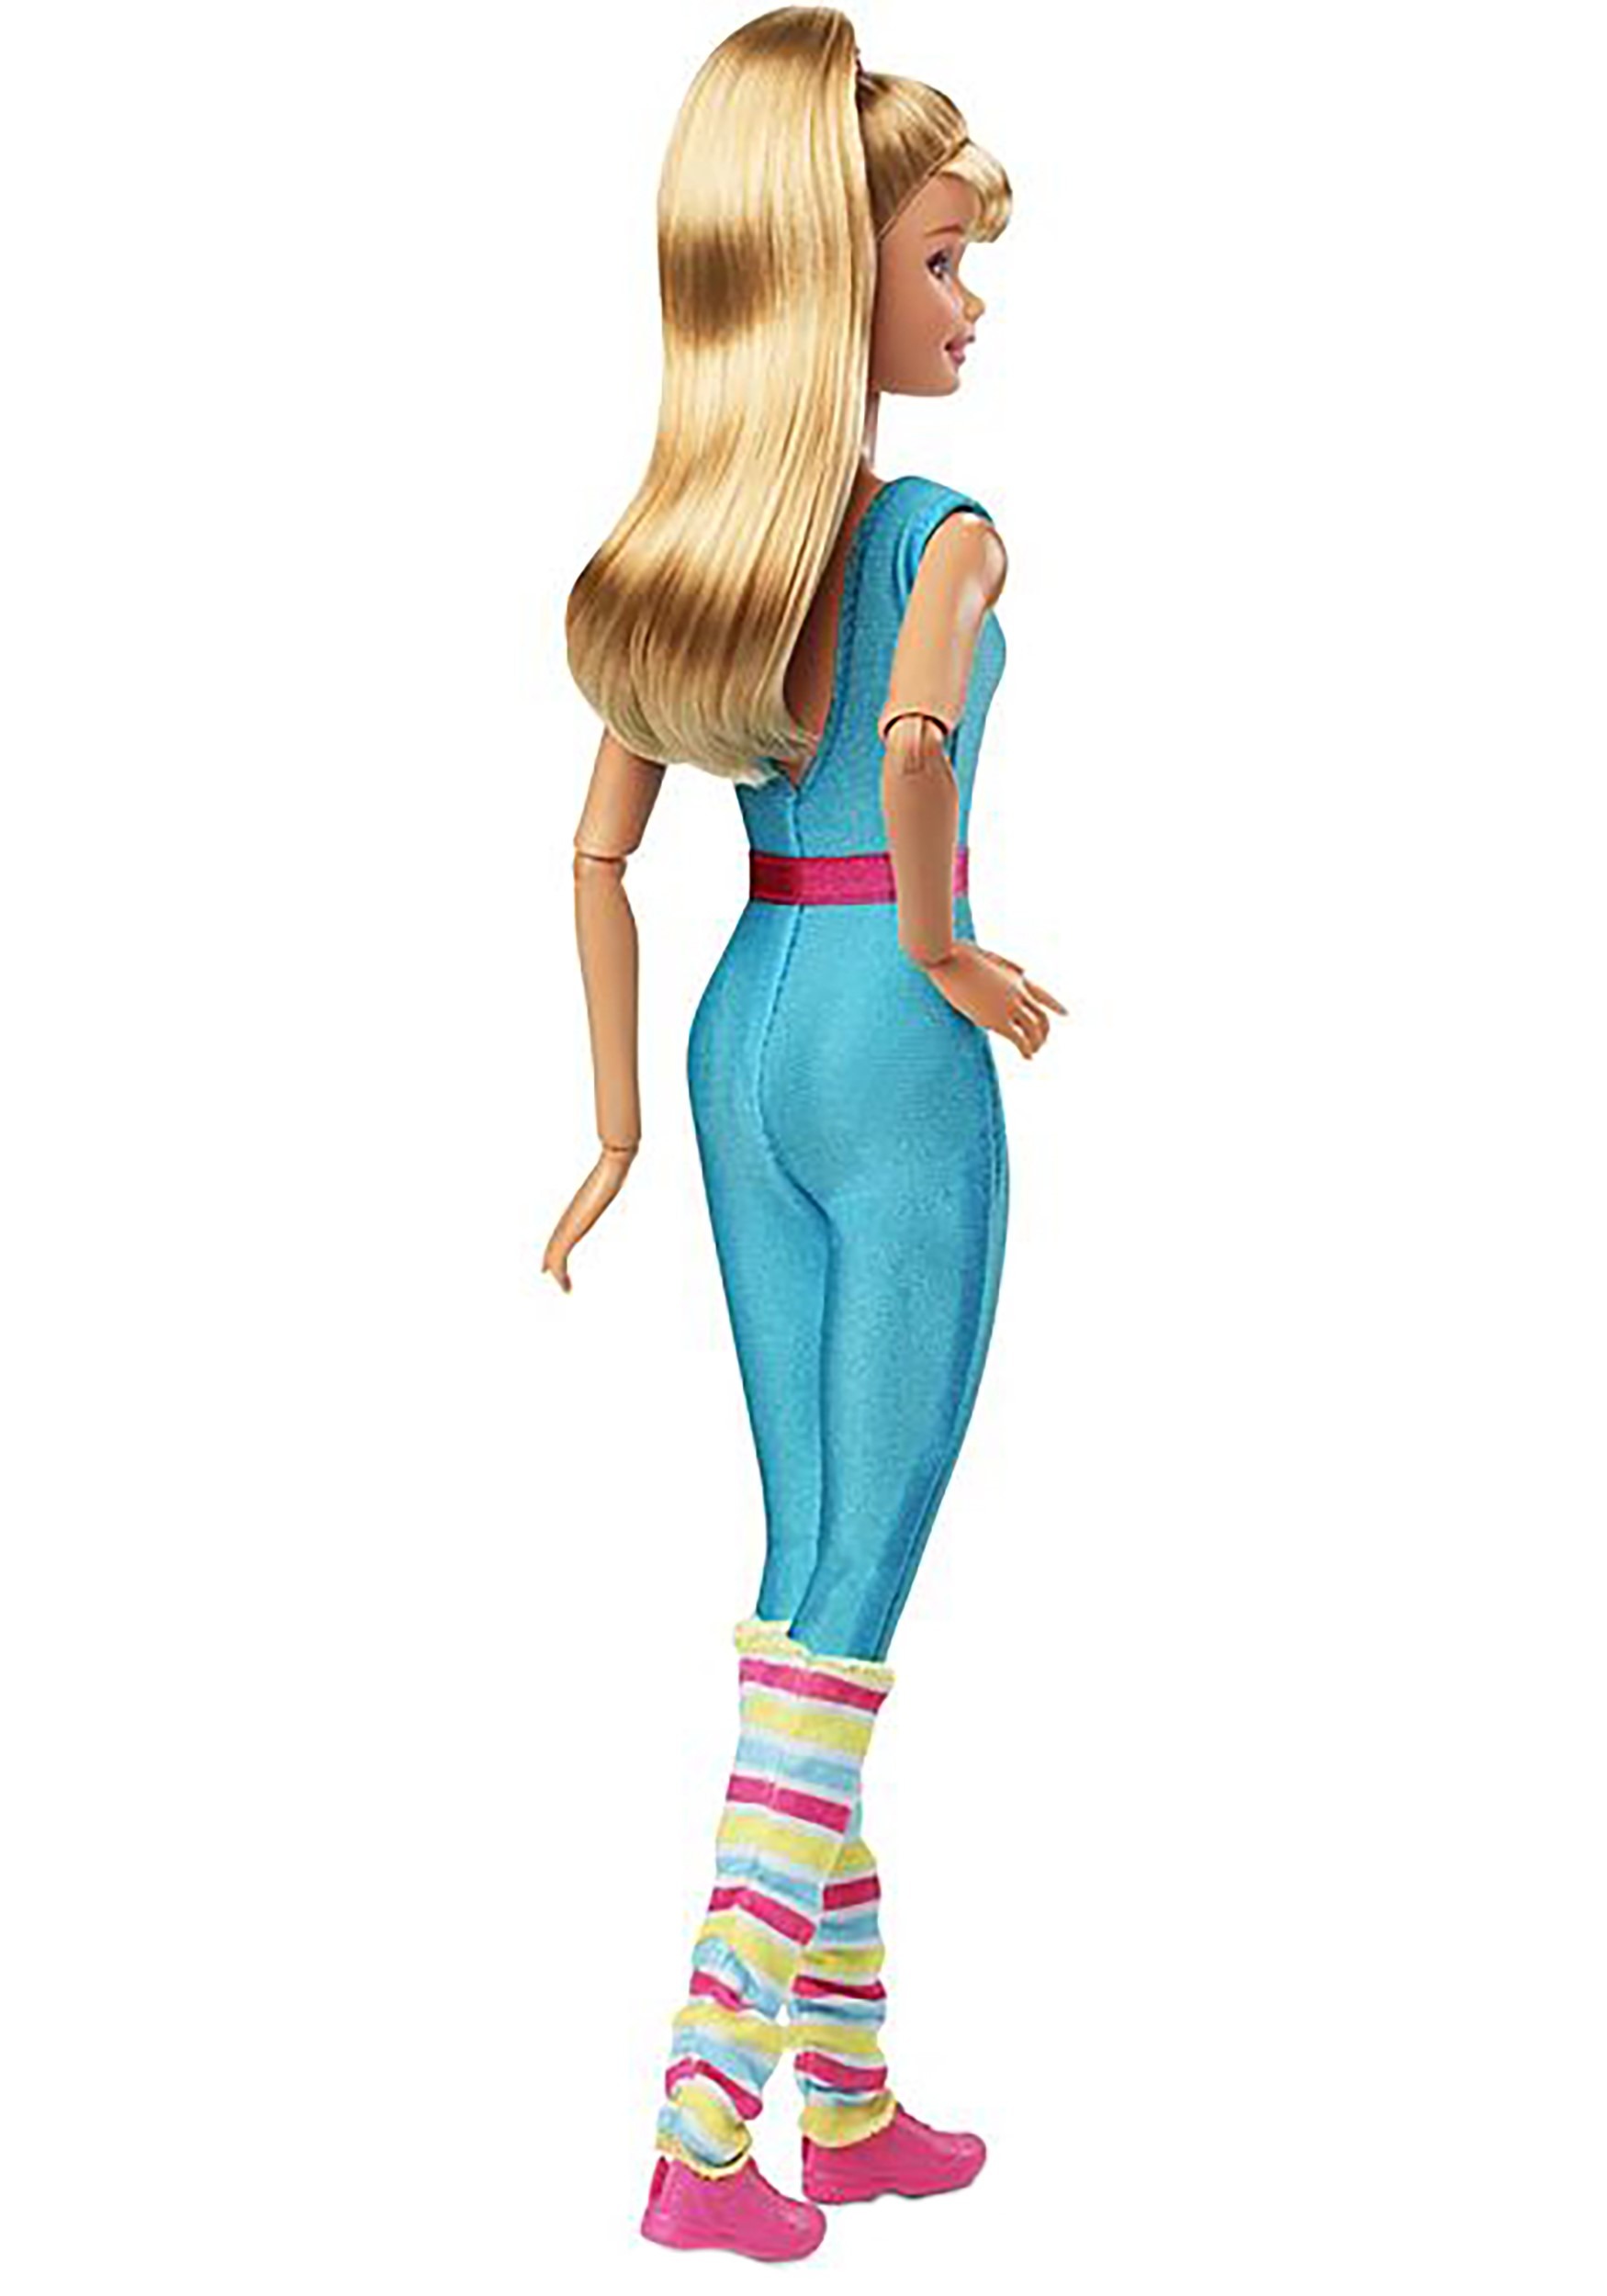 The Toy Story 4 Barbie Doll